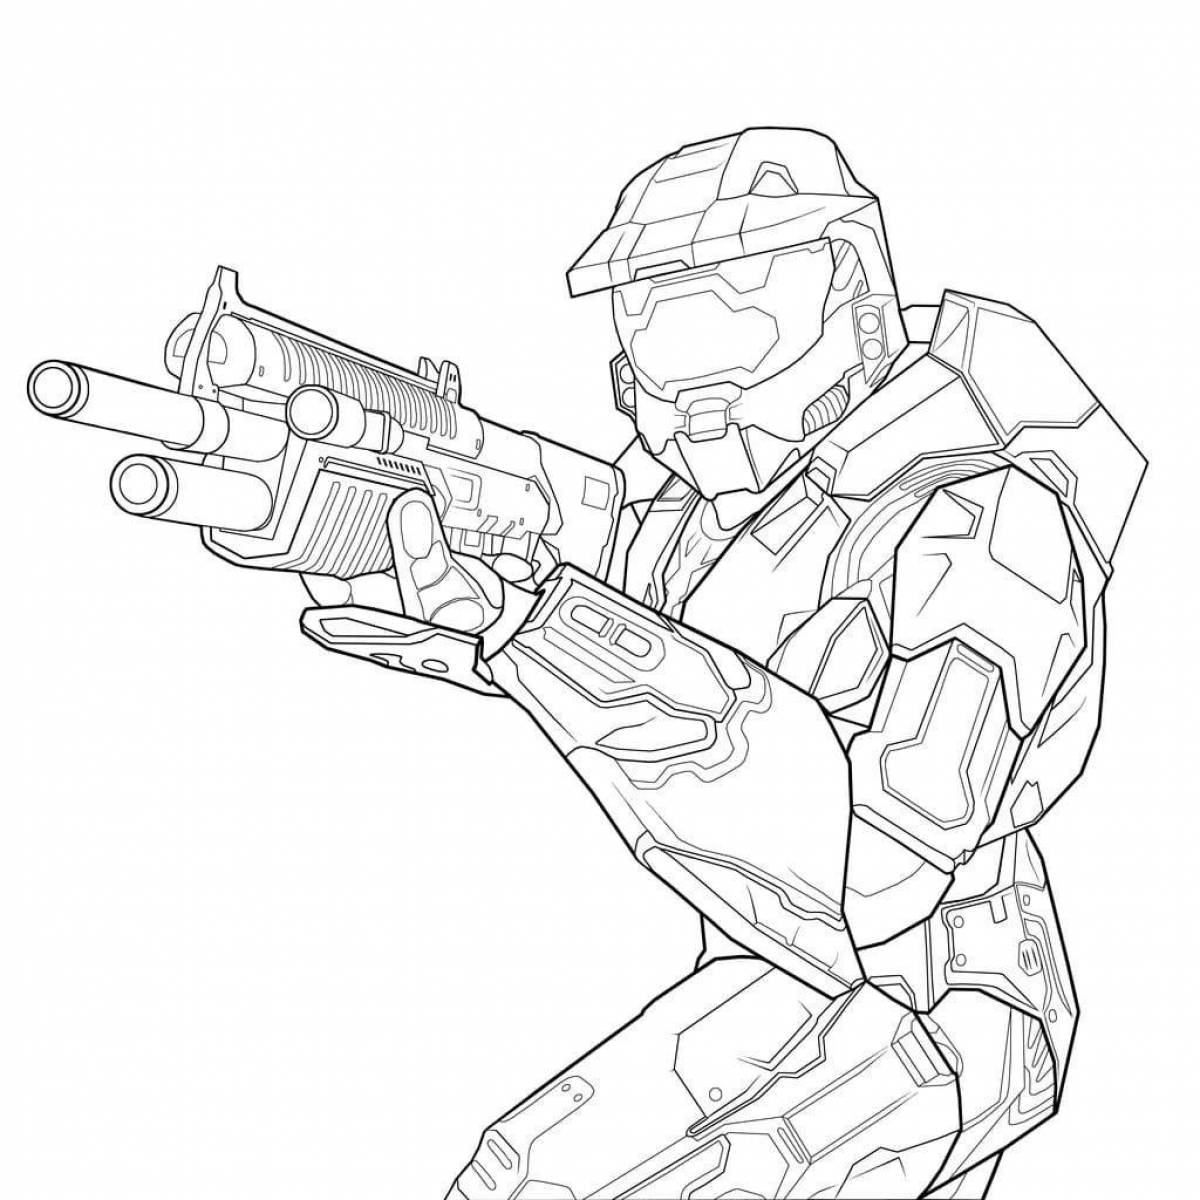 Cute standoff 2 coloring page